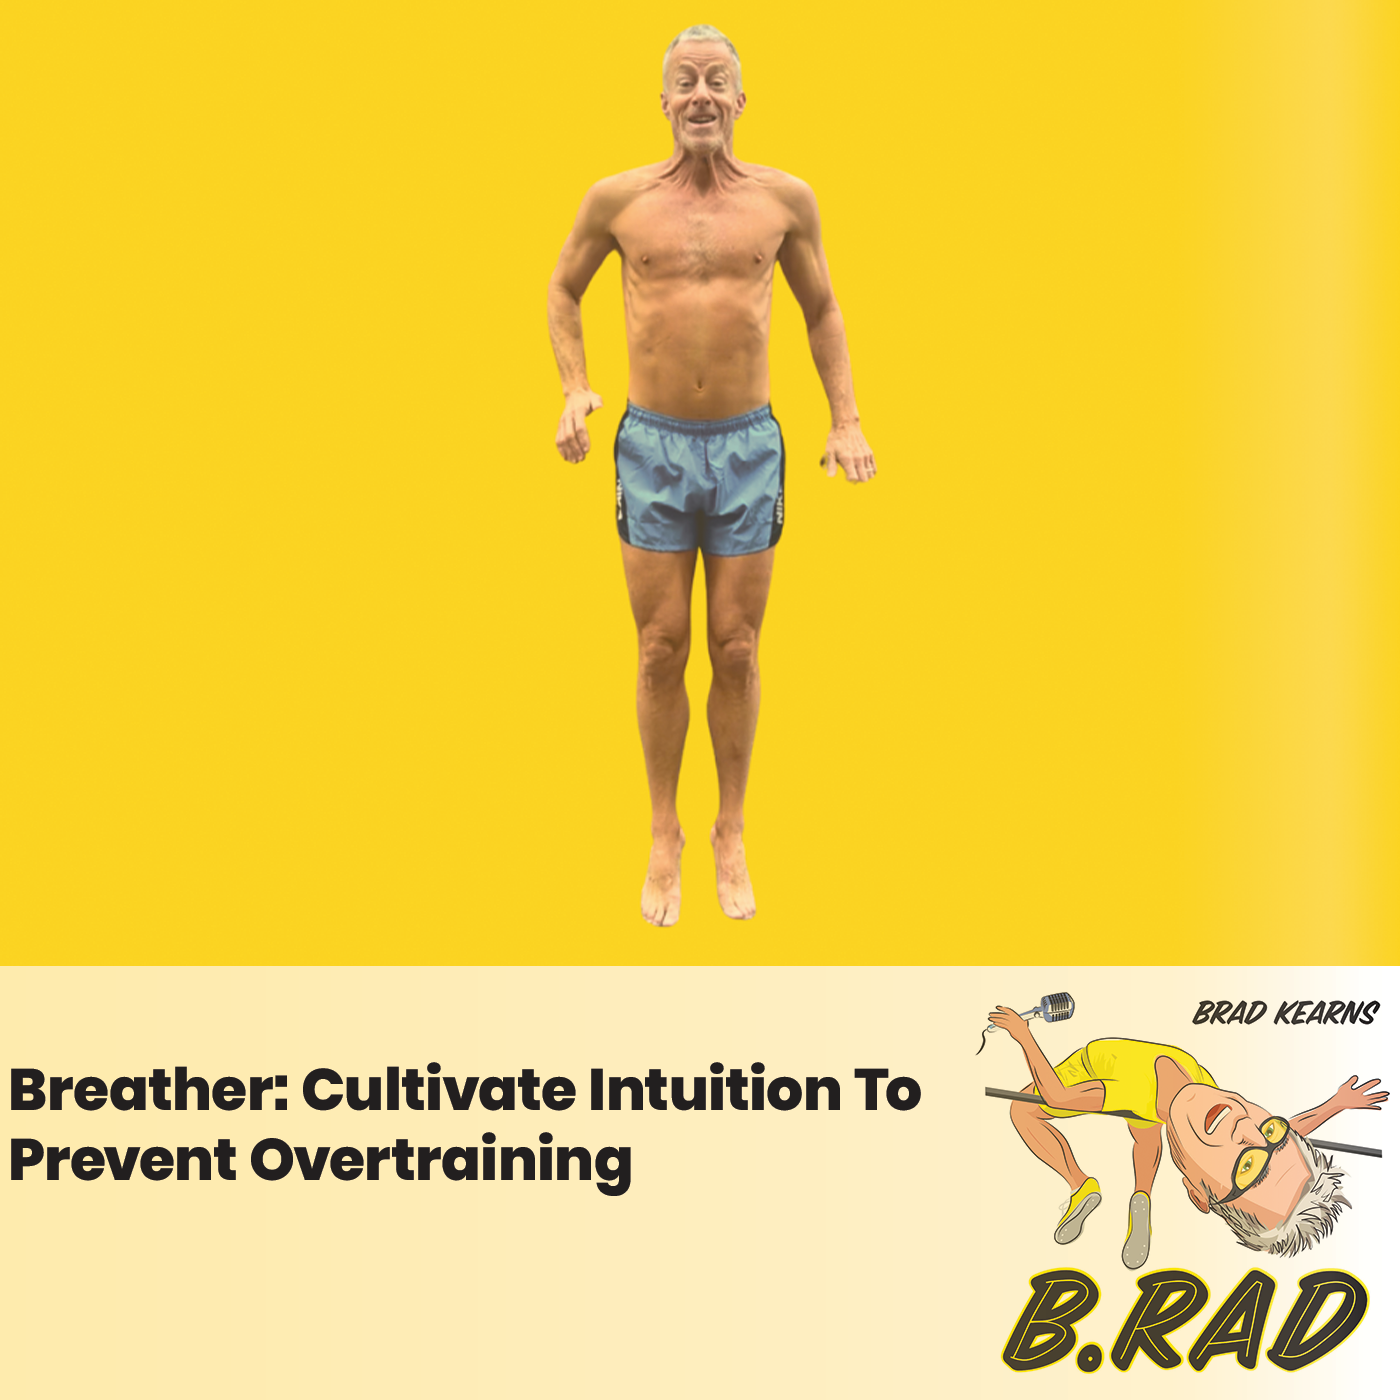 Breather: Cultivate Intuition To Prevent Overtraining